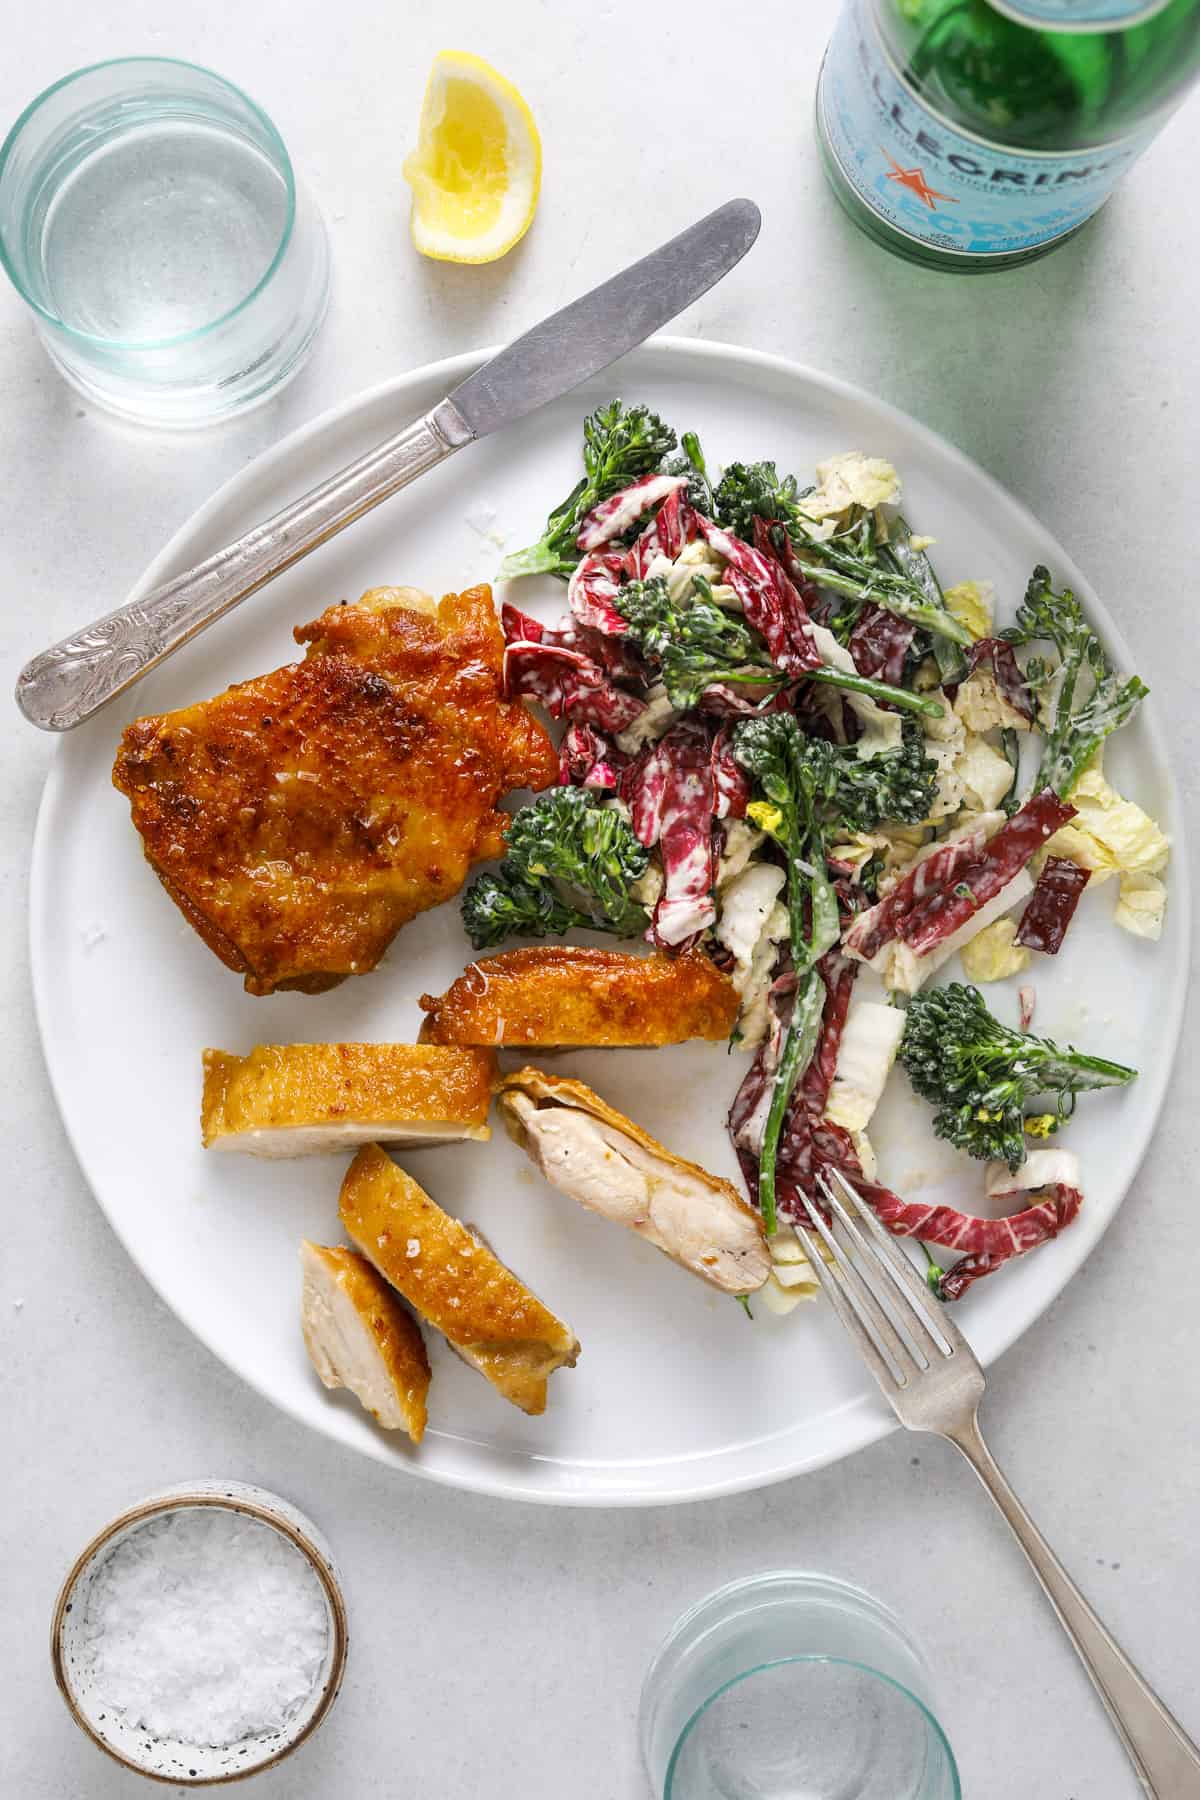 a round white plate with crispy chicken thighs and broccolini slaw. a bottle of San Pellegrino. two light blue glasses of water on the side.